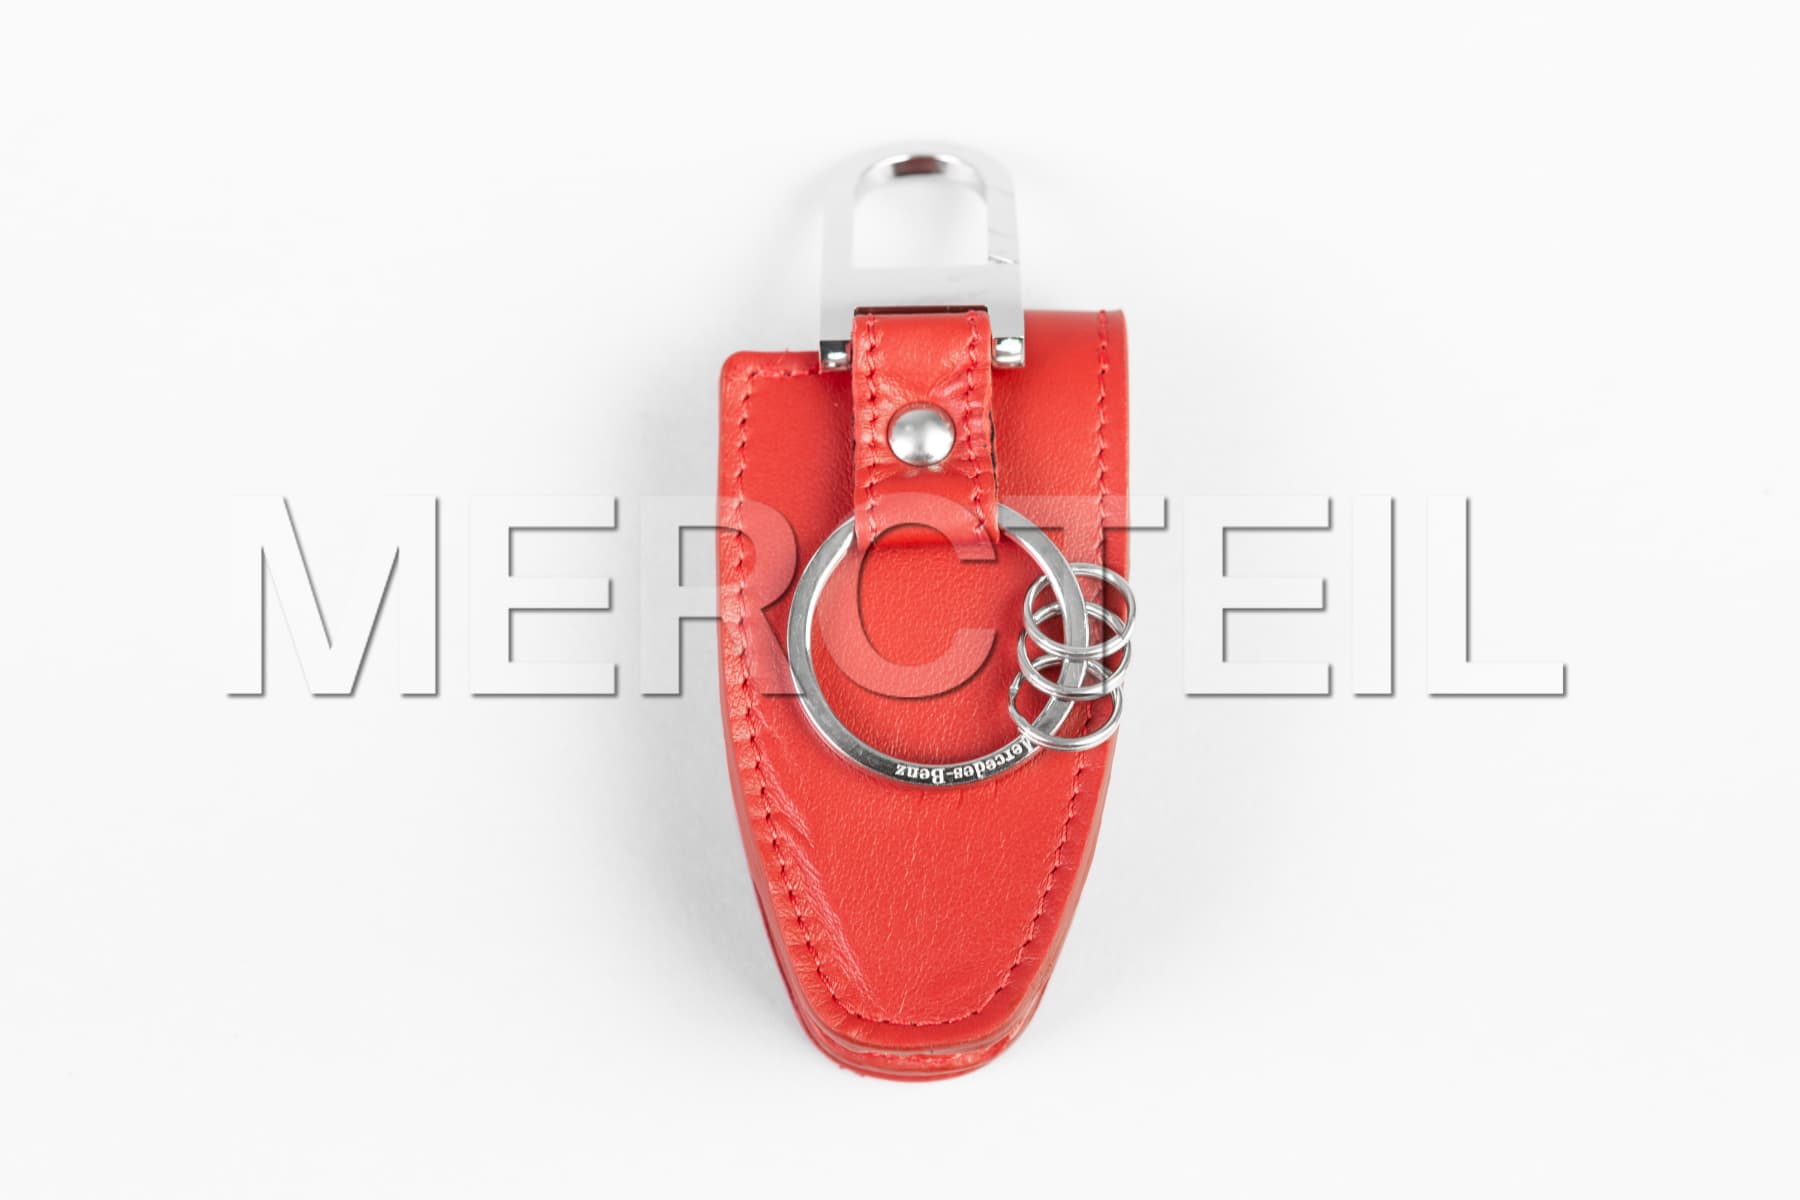 Red Leather Key Wallet 5th Generation Genuine Mercedes-Benz (part number: B66958406)